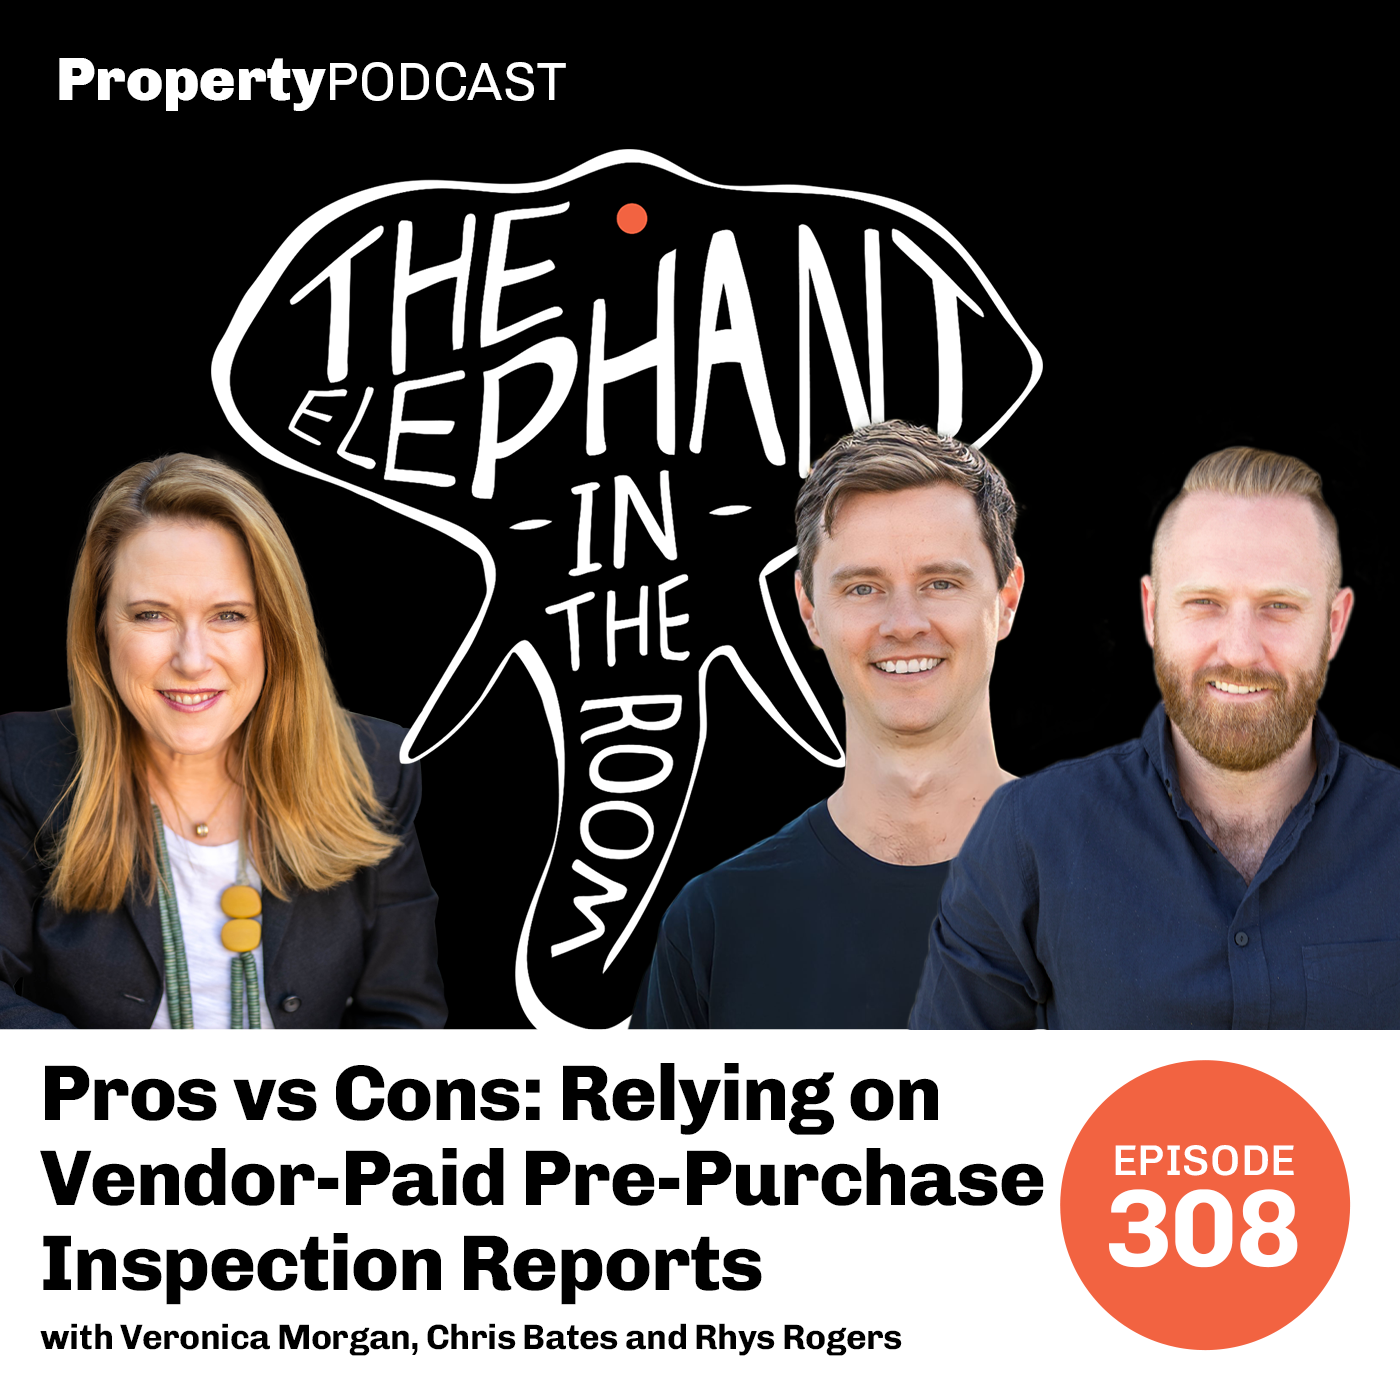 Pros vs Cons: Relying on Vendor-Paid Pre-Purchase Inspection Reports